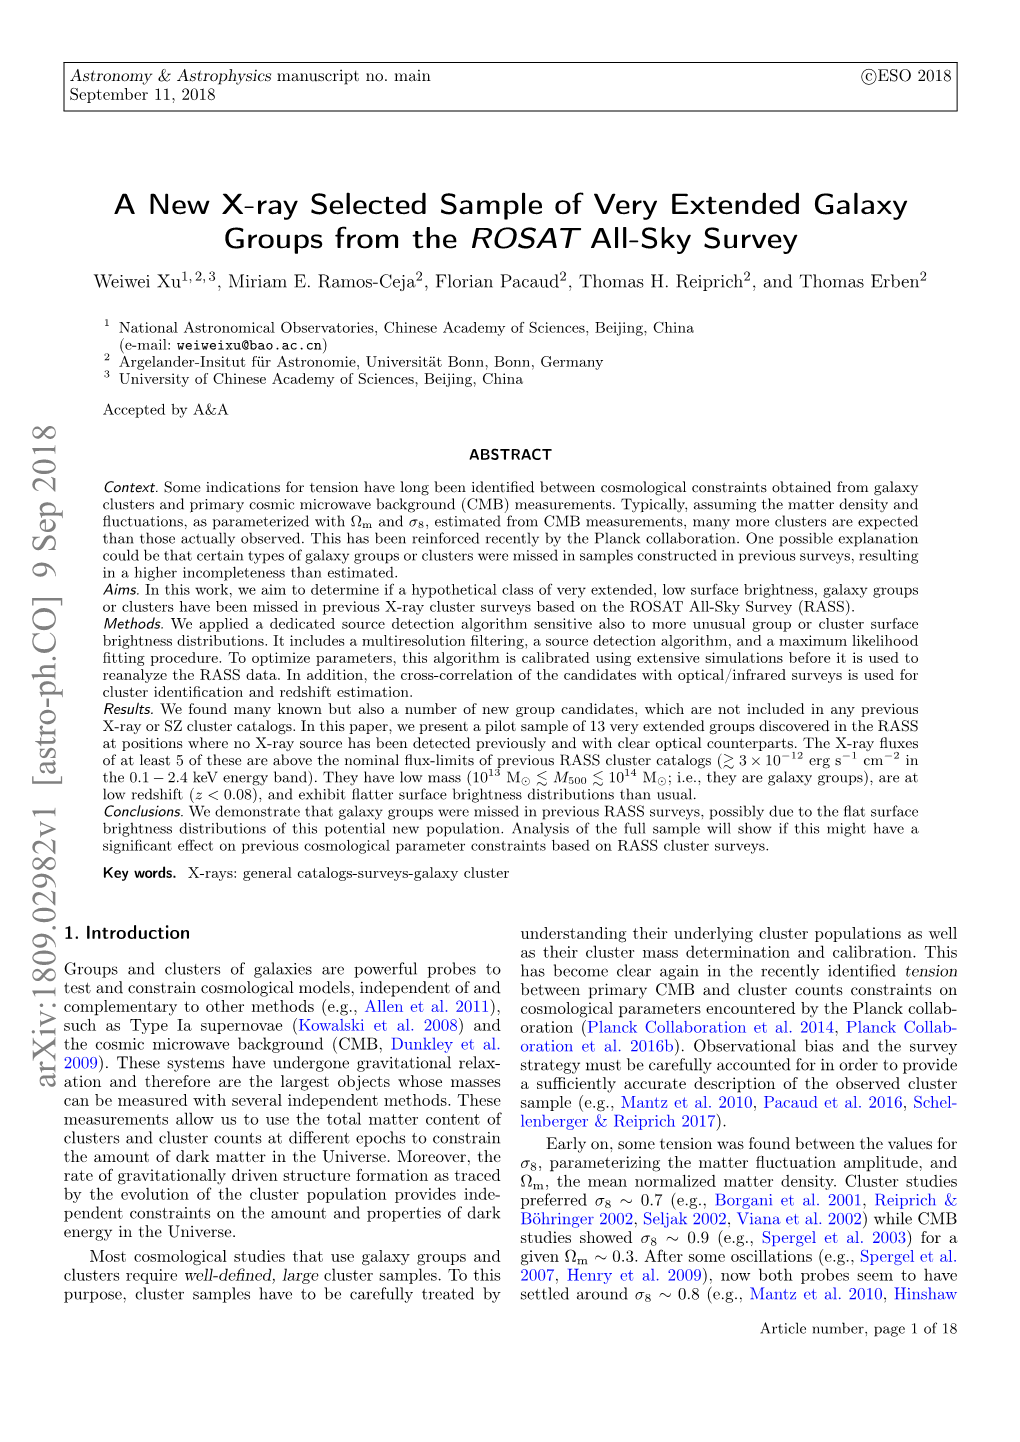 A New X-Ray Selected Sample of Very Extended Galaxy Groups from the ROSAT All-Sky Survey Weiwei Xu1, 2, 3, Miriam E